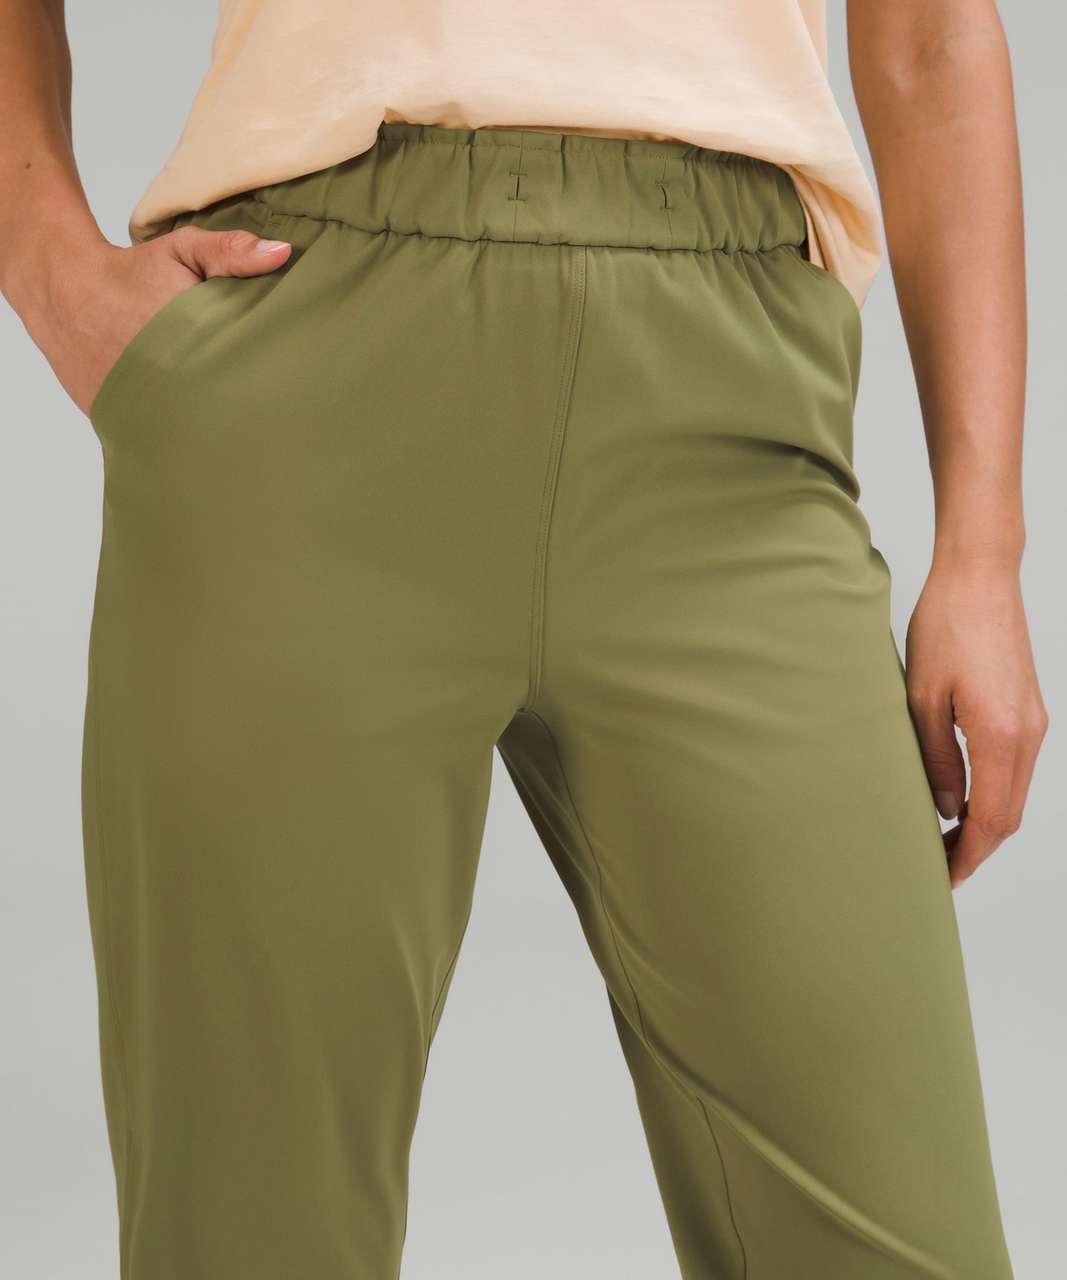 Active 7/8 Length Relaxed Travel Pants - Olive Green